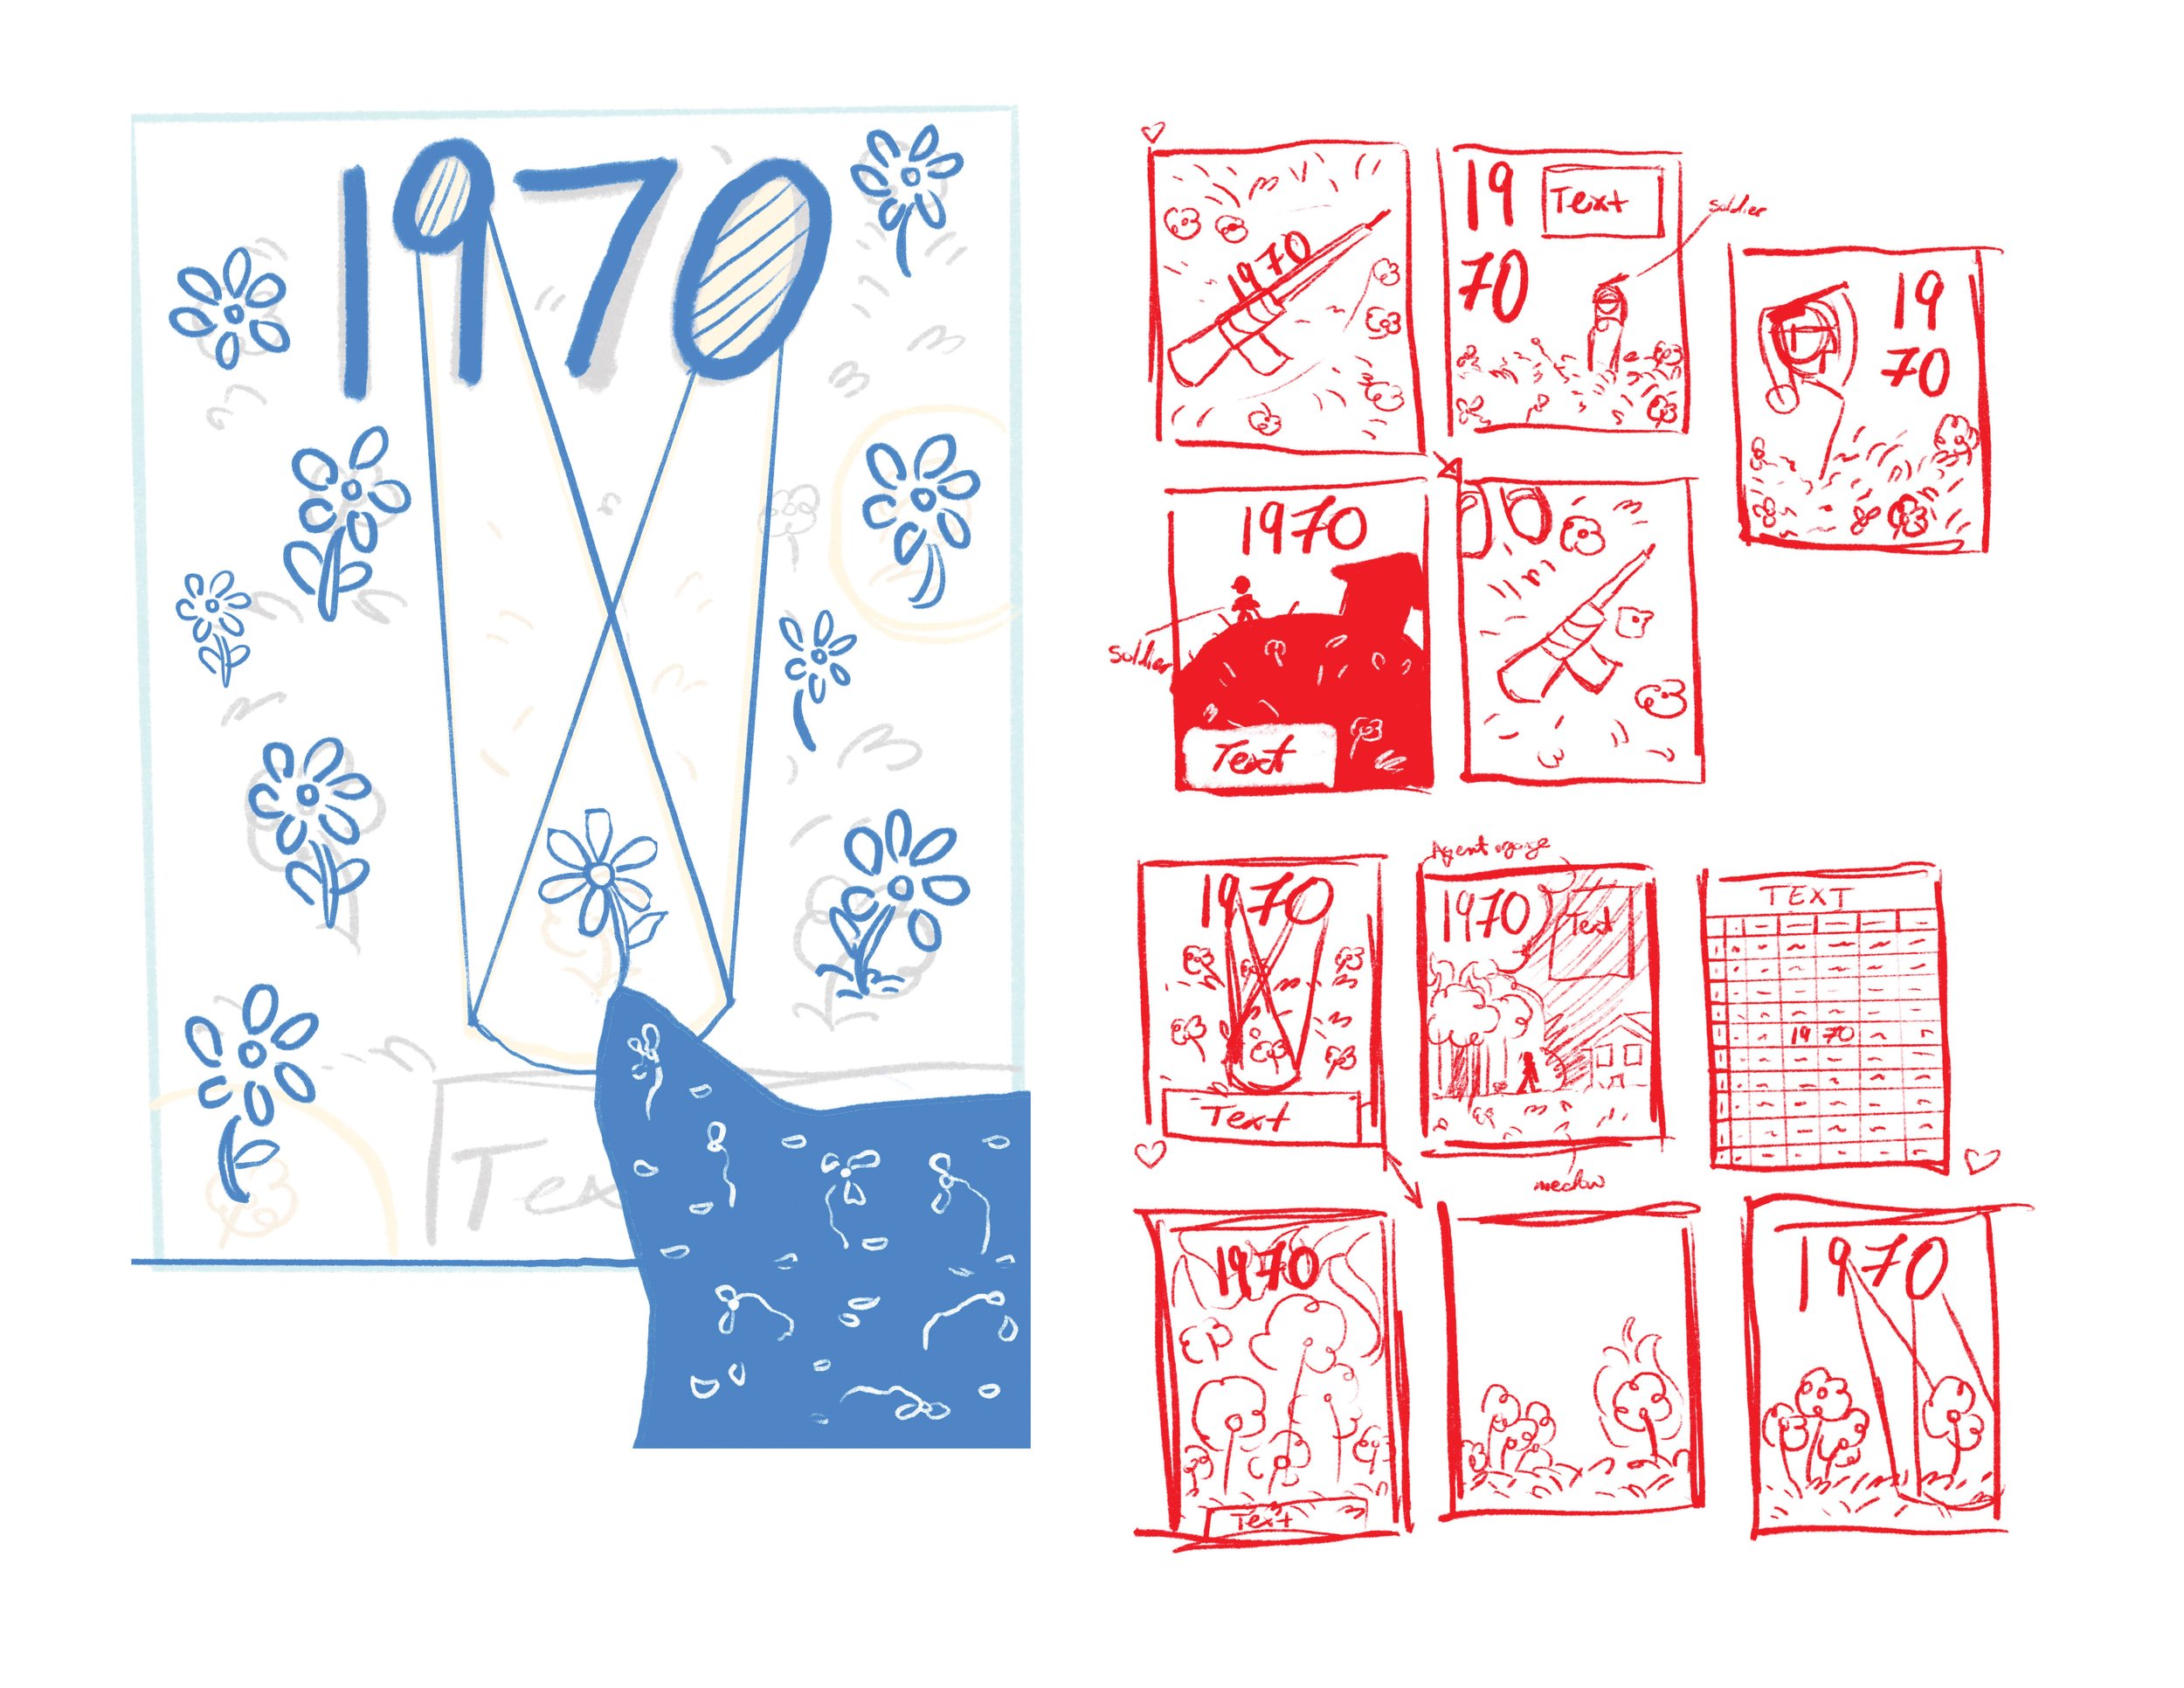  1970 by Scott Lax poster illustration Thumbnails/Sketches